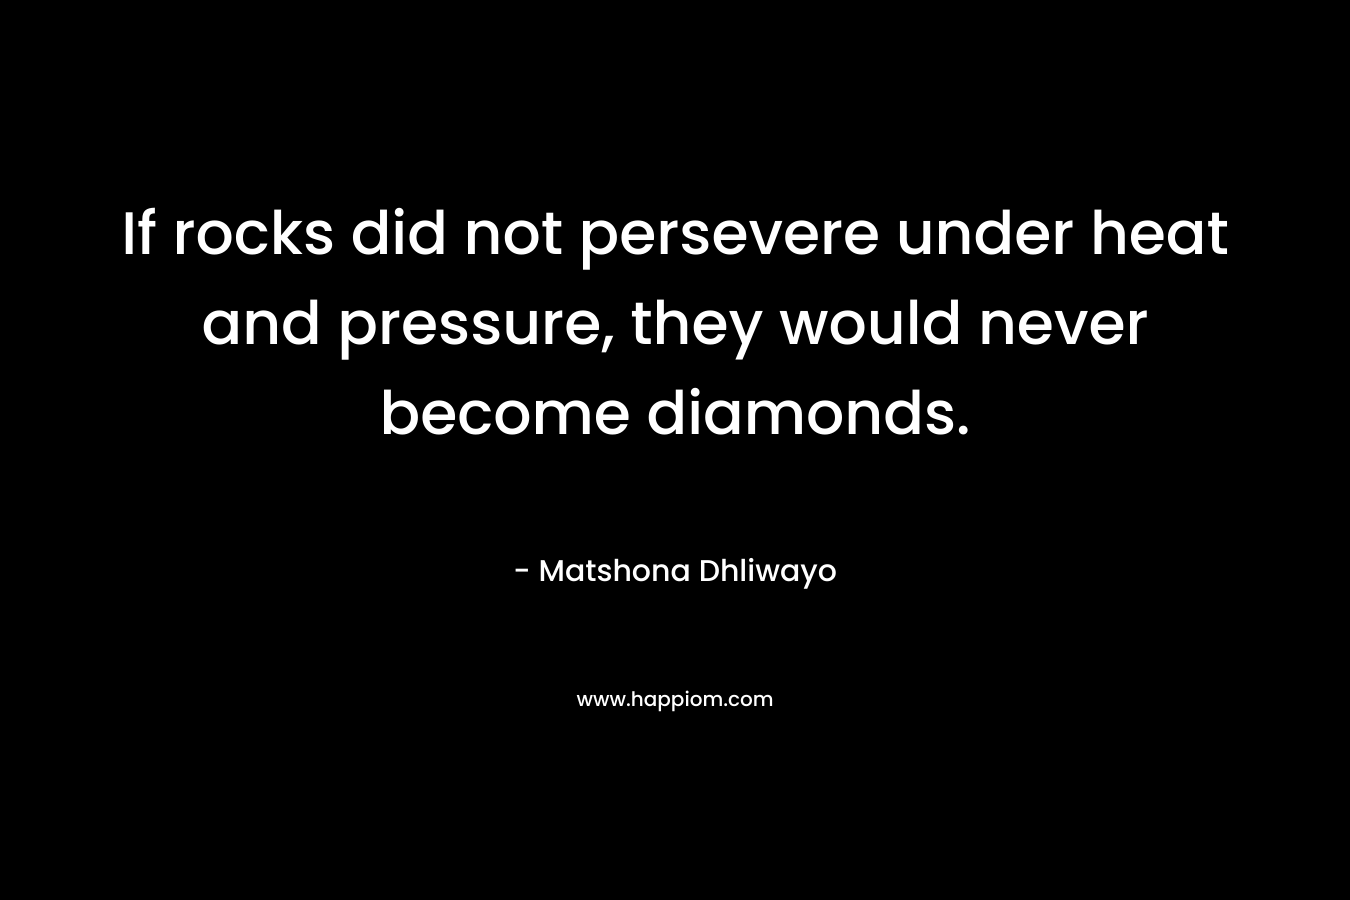 If rocks did not persevere under heat and pressure, they would never become diamonds. – Matshona Dhliwayo